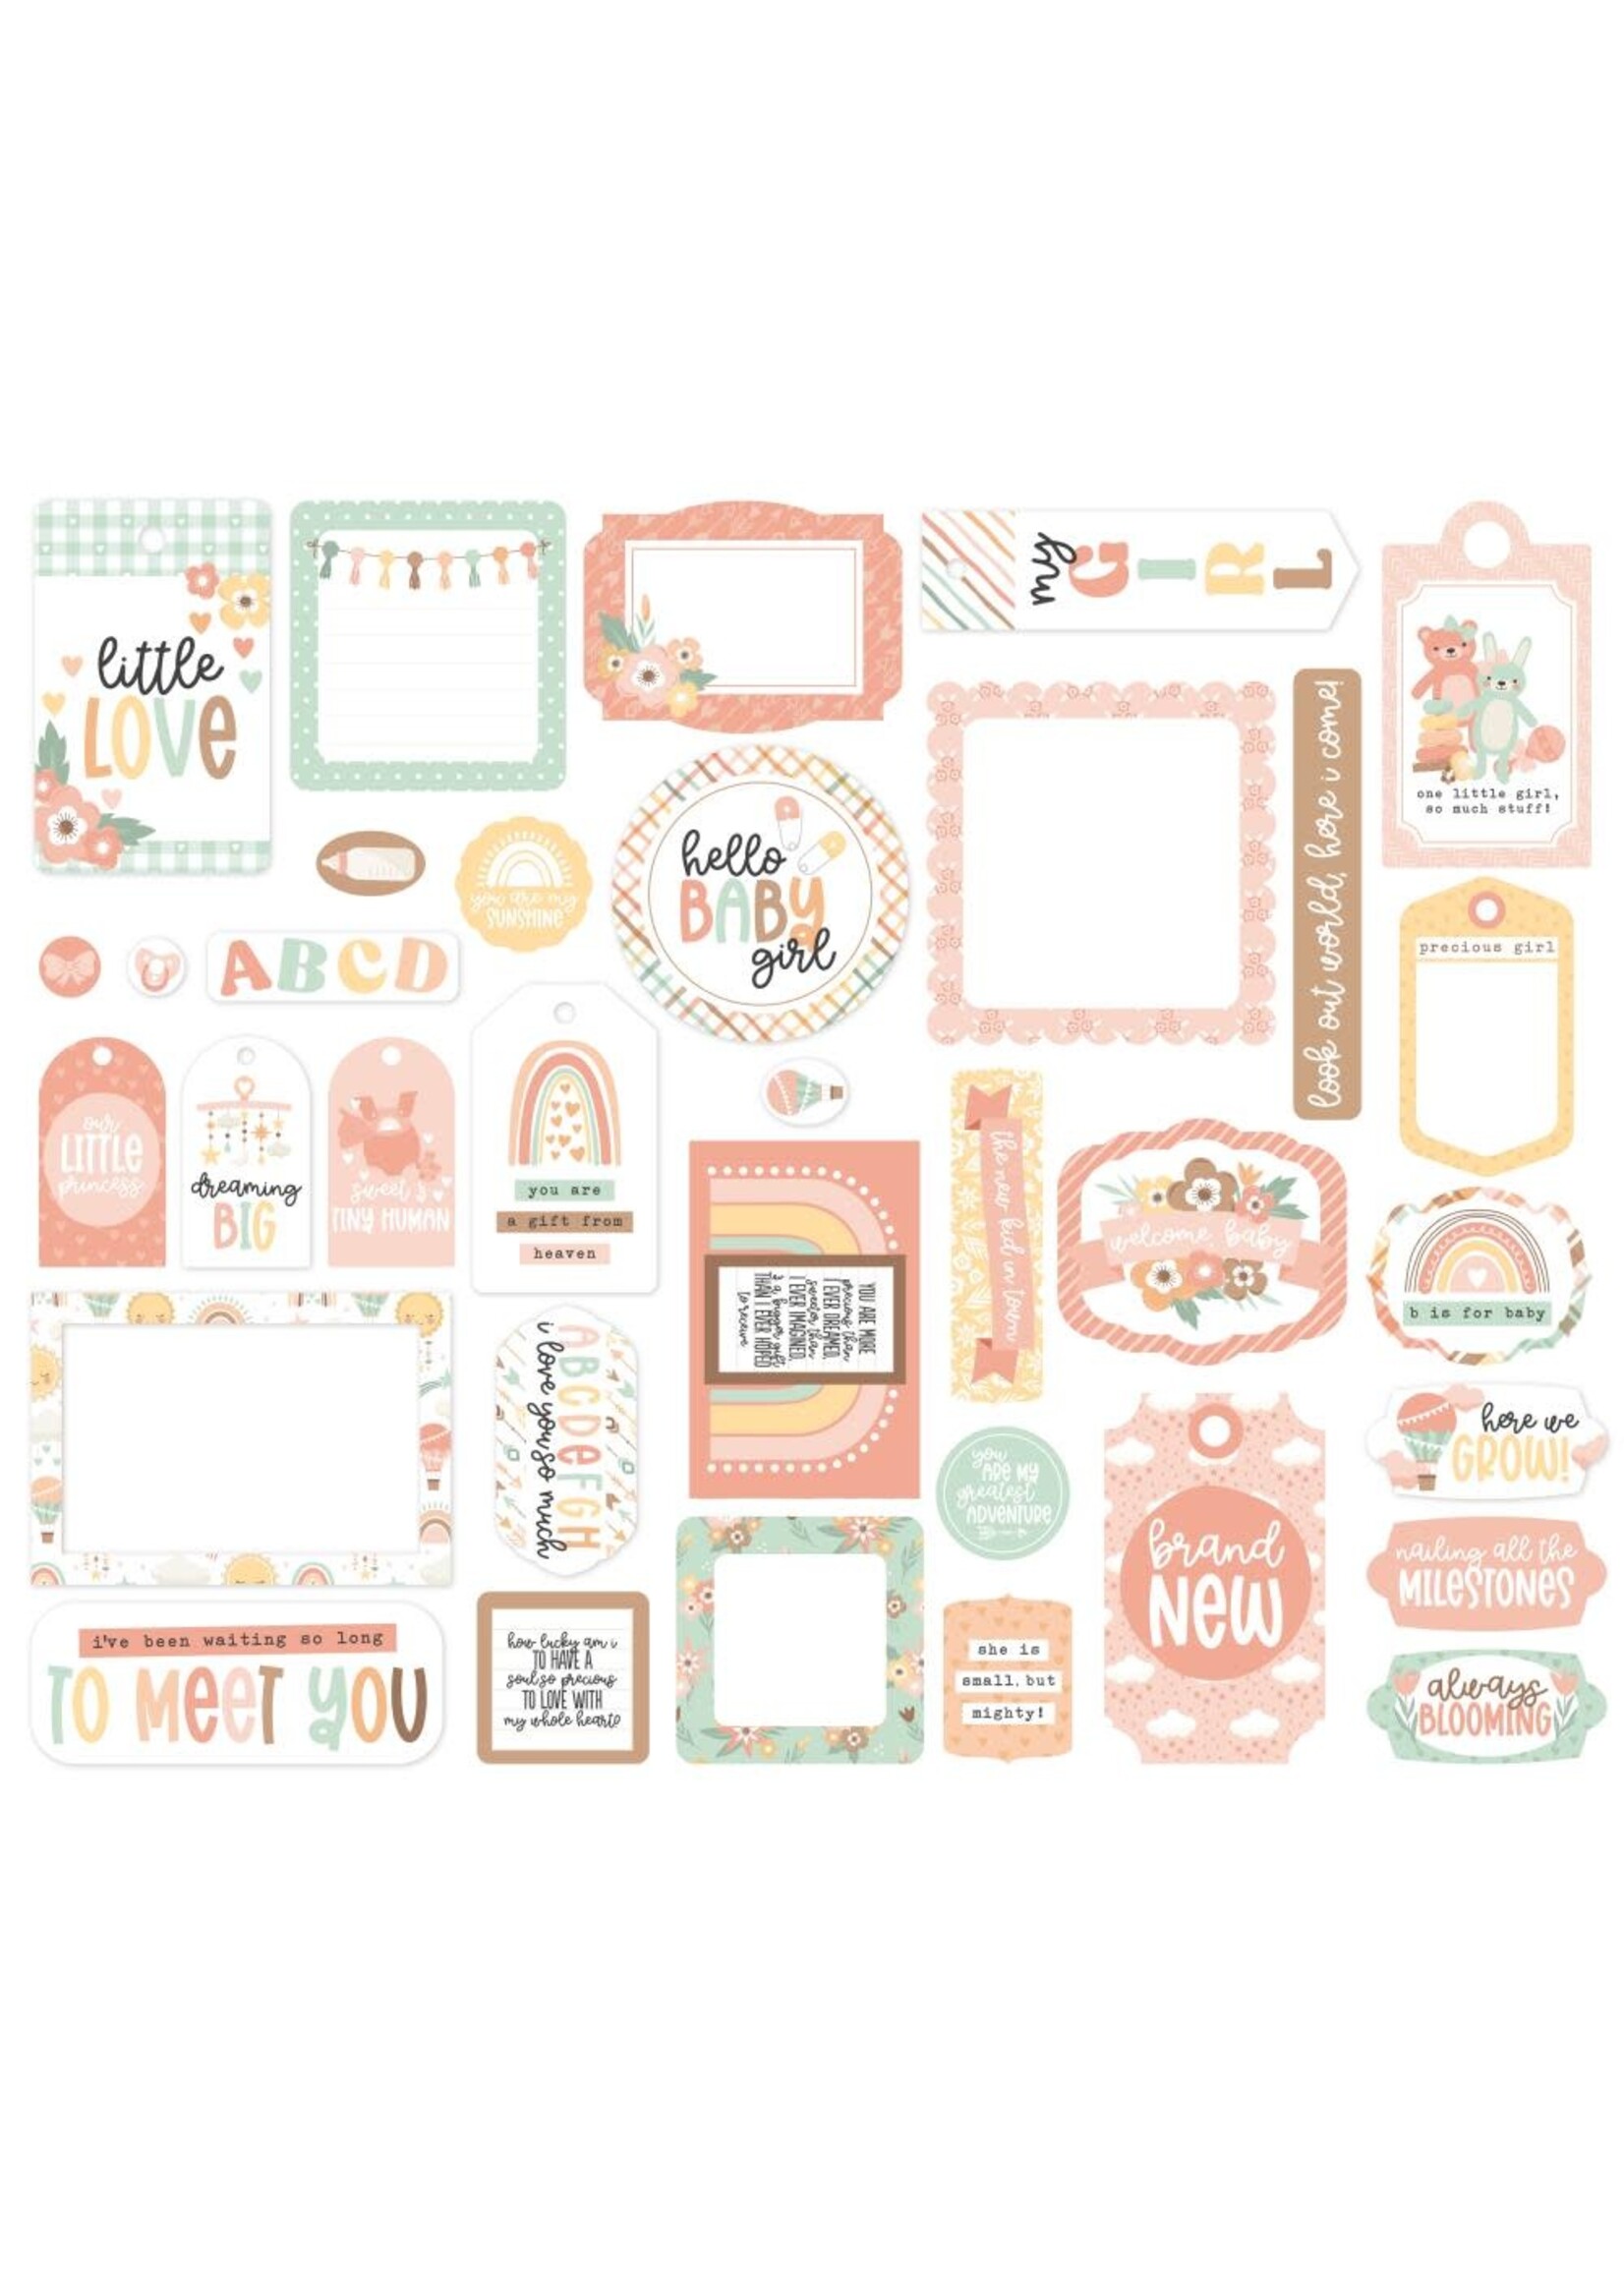 ECHO PARK PAPER COMPANY Our Baby Girl - Frames & Tags